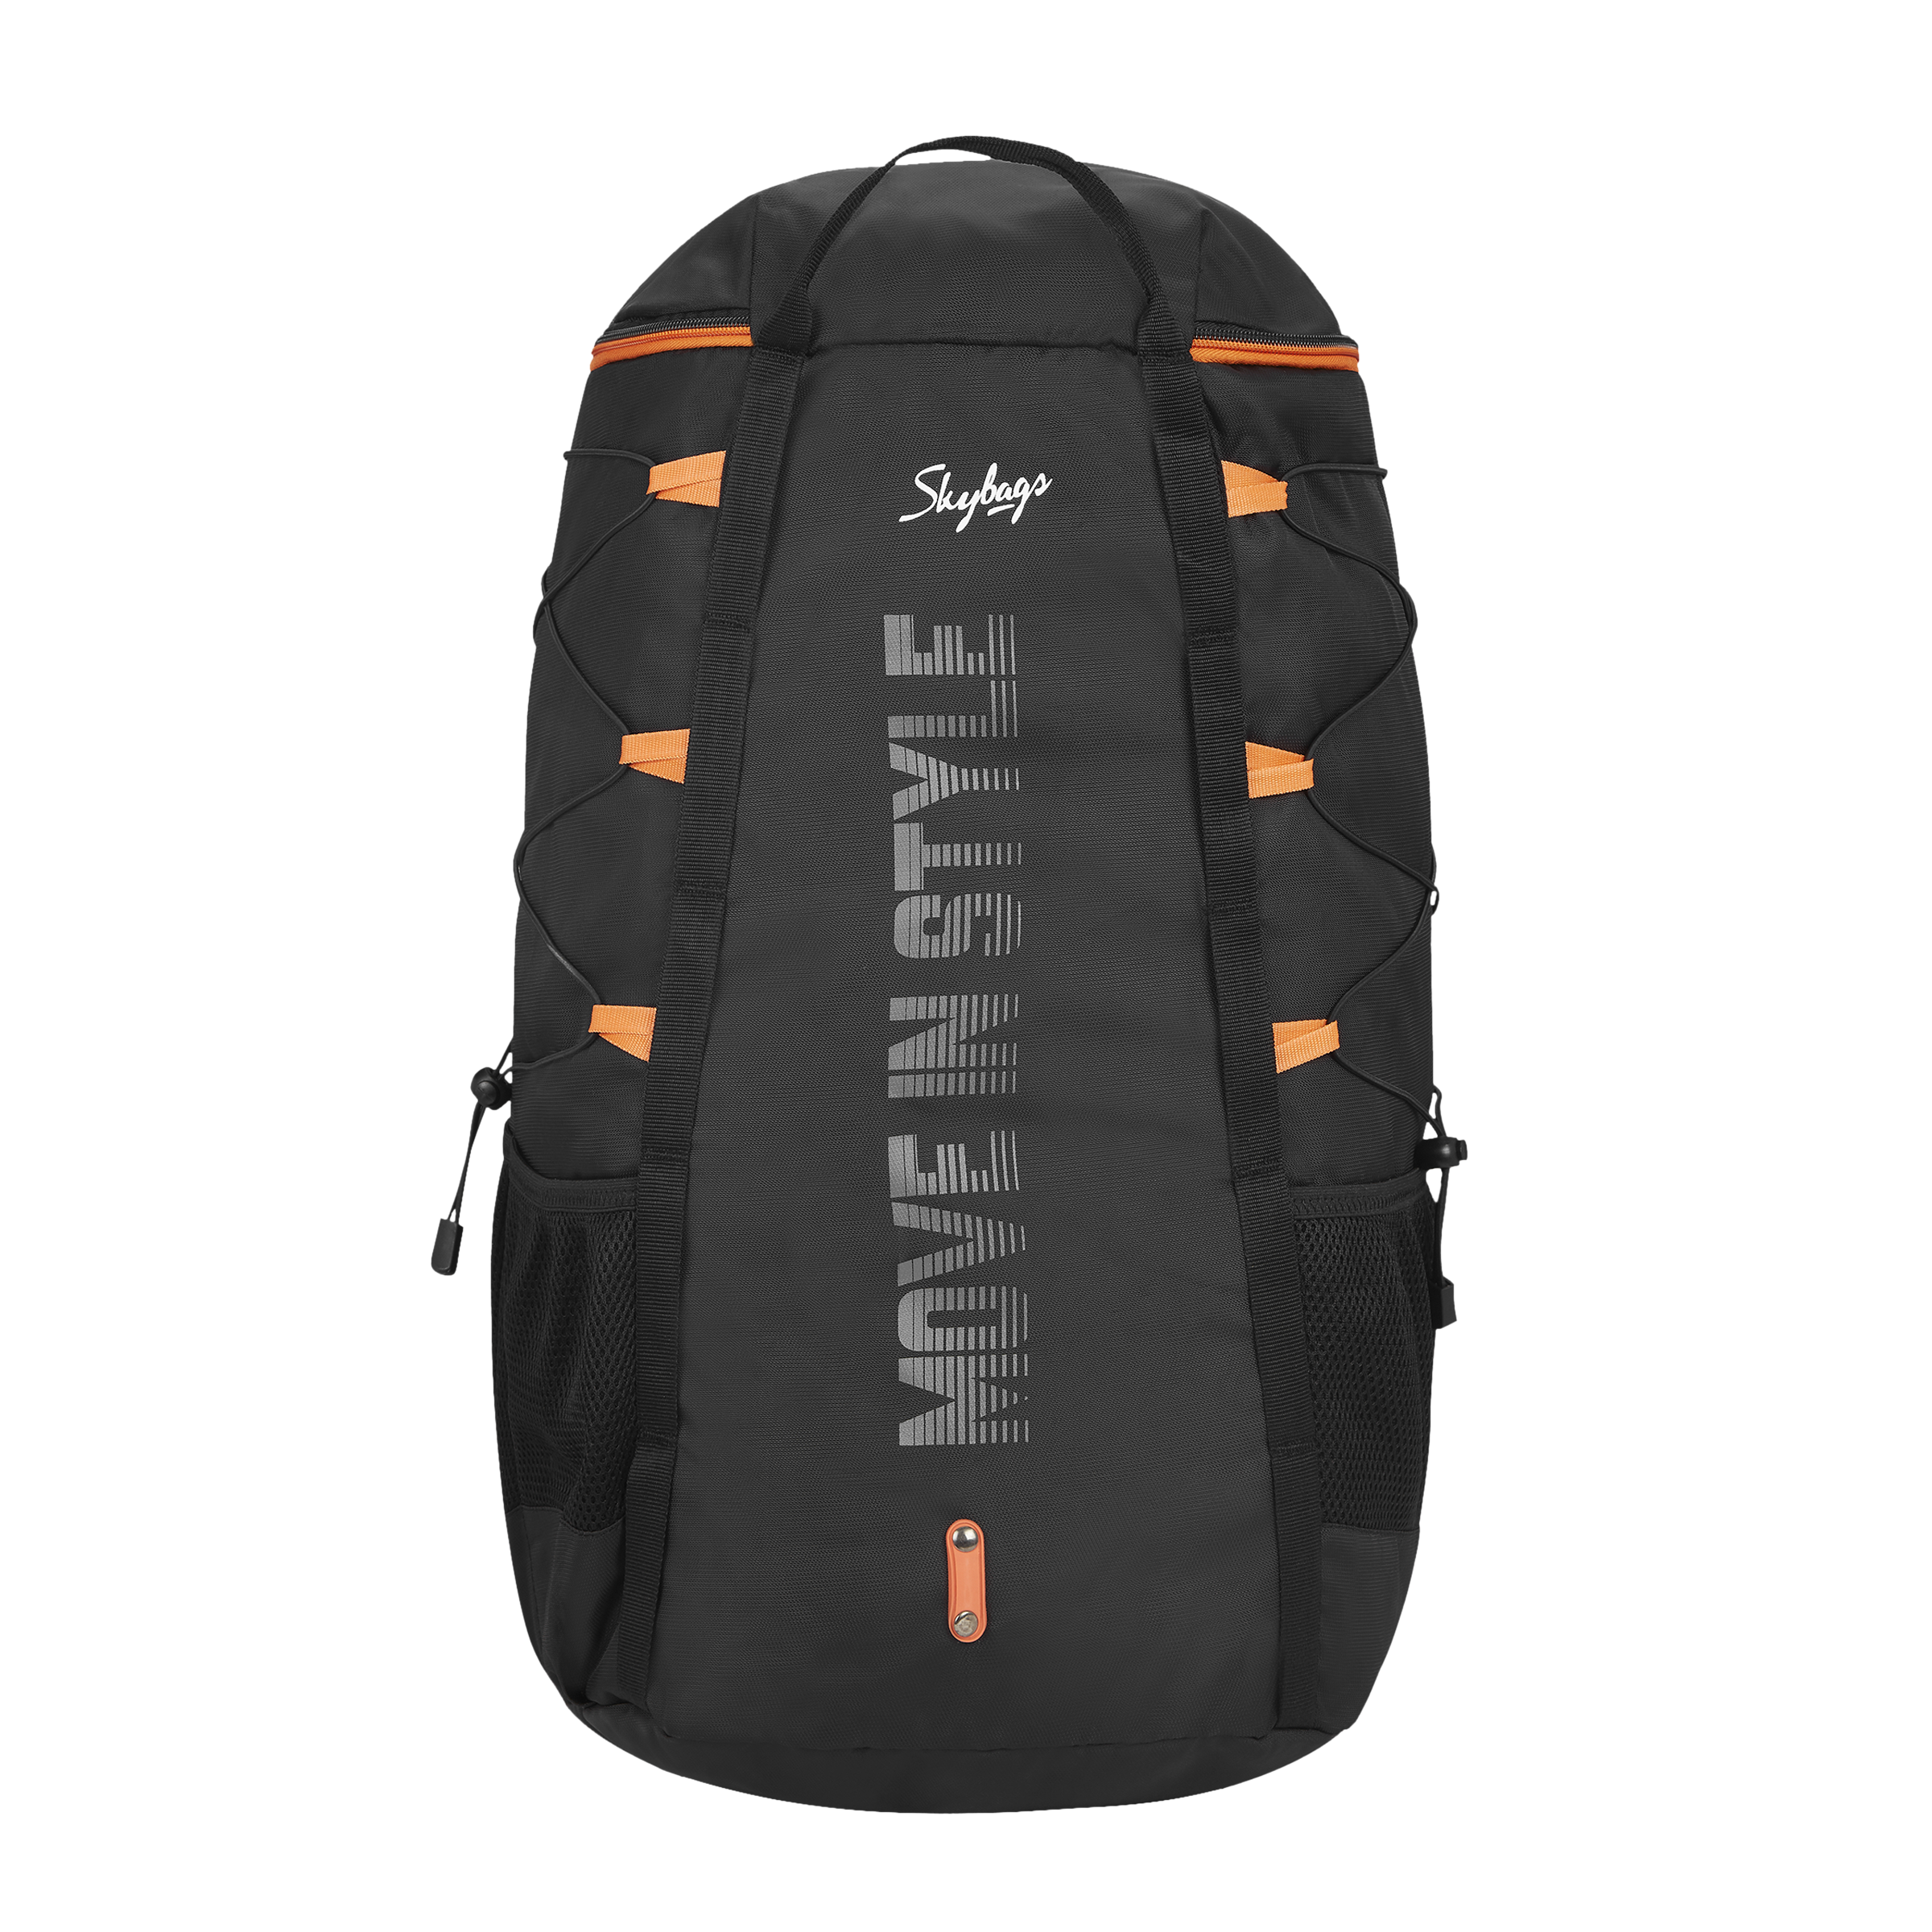 Buy Skybags Luggage  Backpacks Online At Lowest Prices  Tata CLiQ